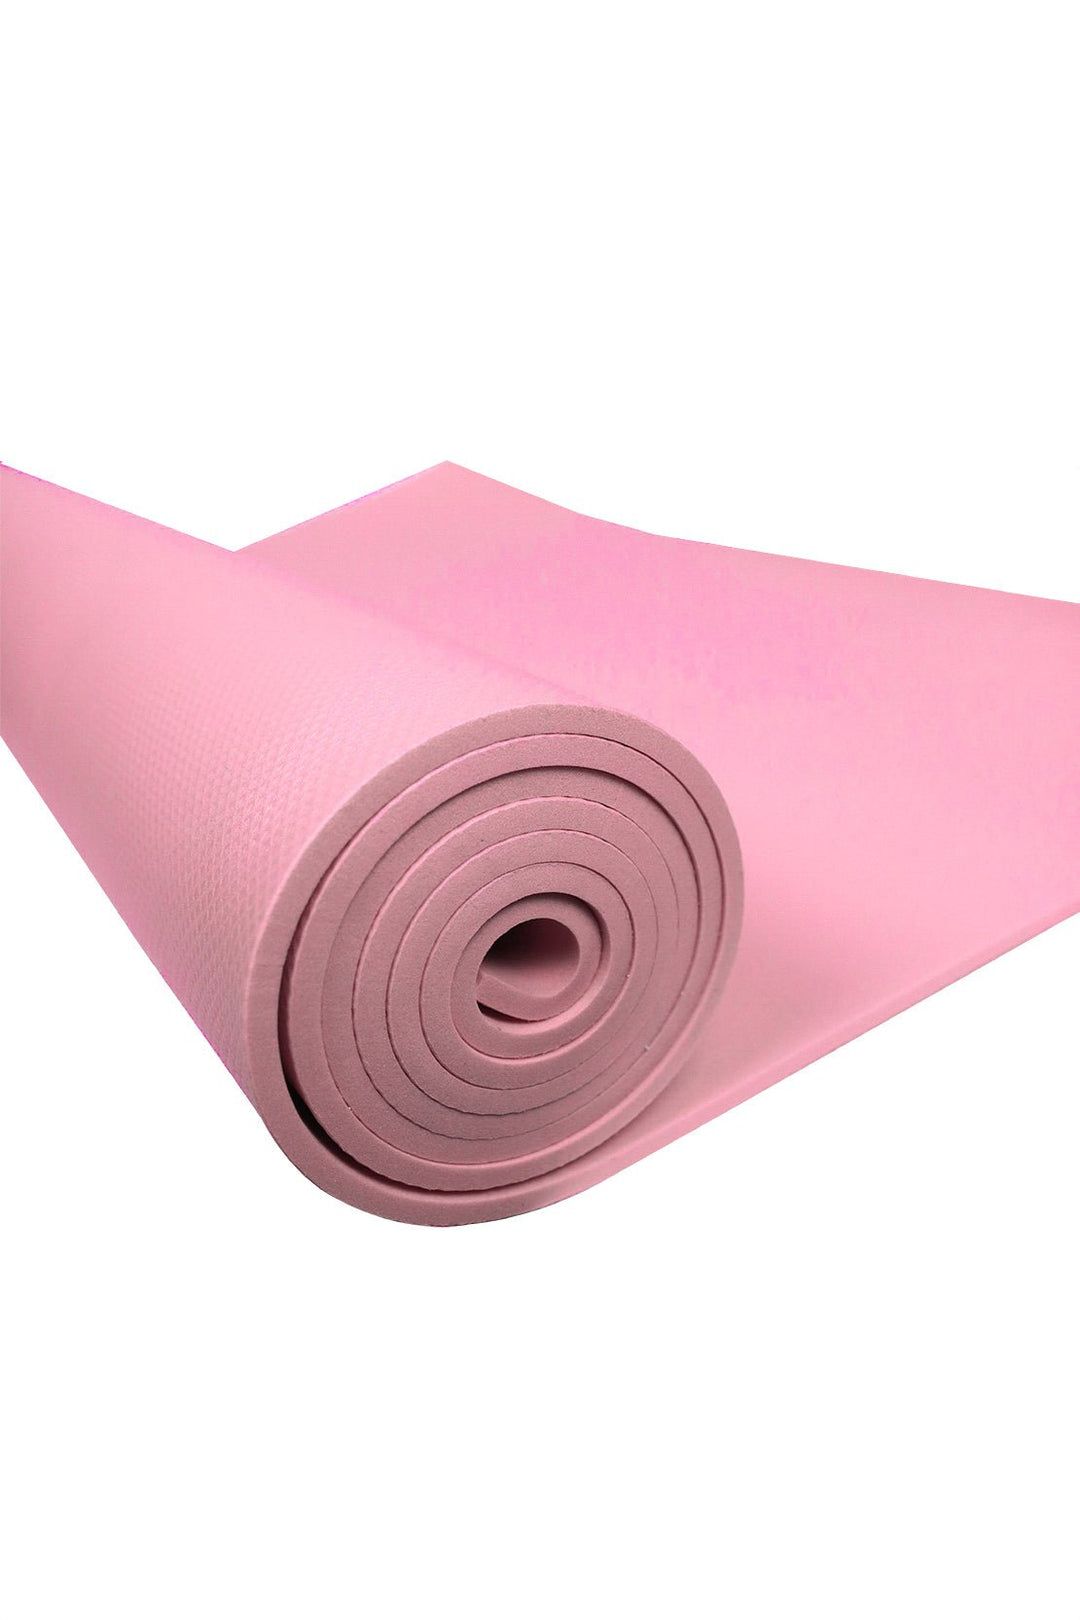 10 mm Thick Yoga Mat for Indoor and Outdoor Use, Pink - V Surfaces